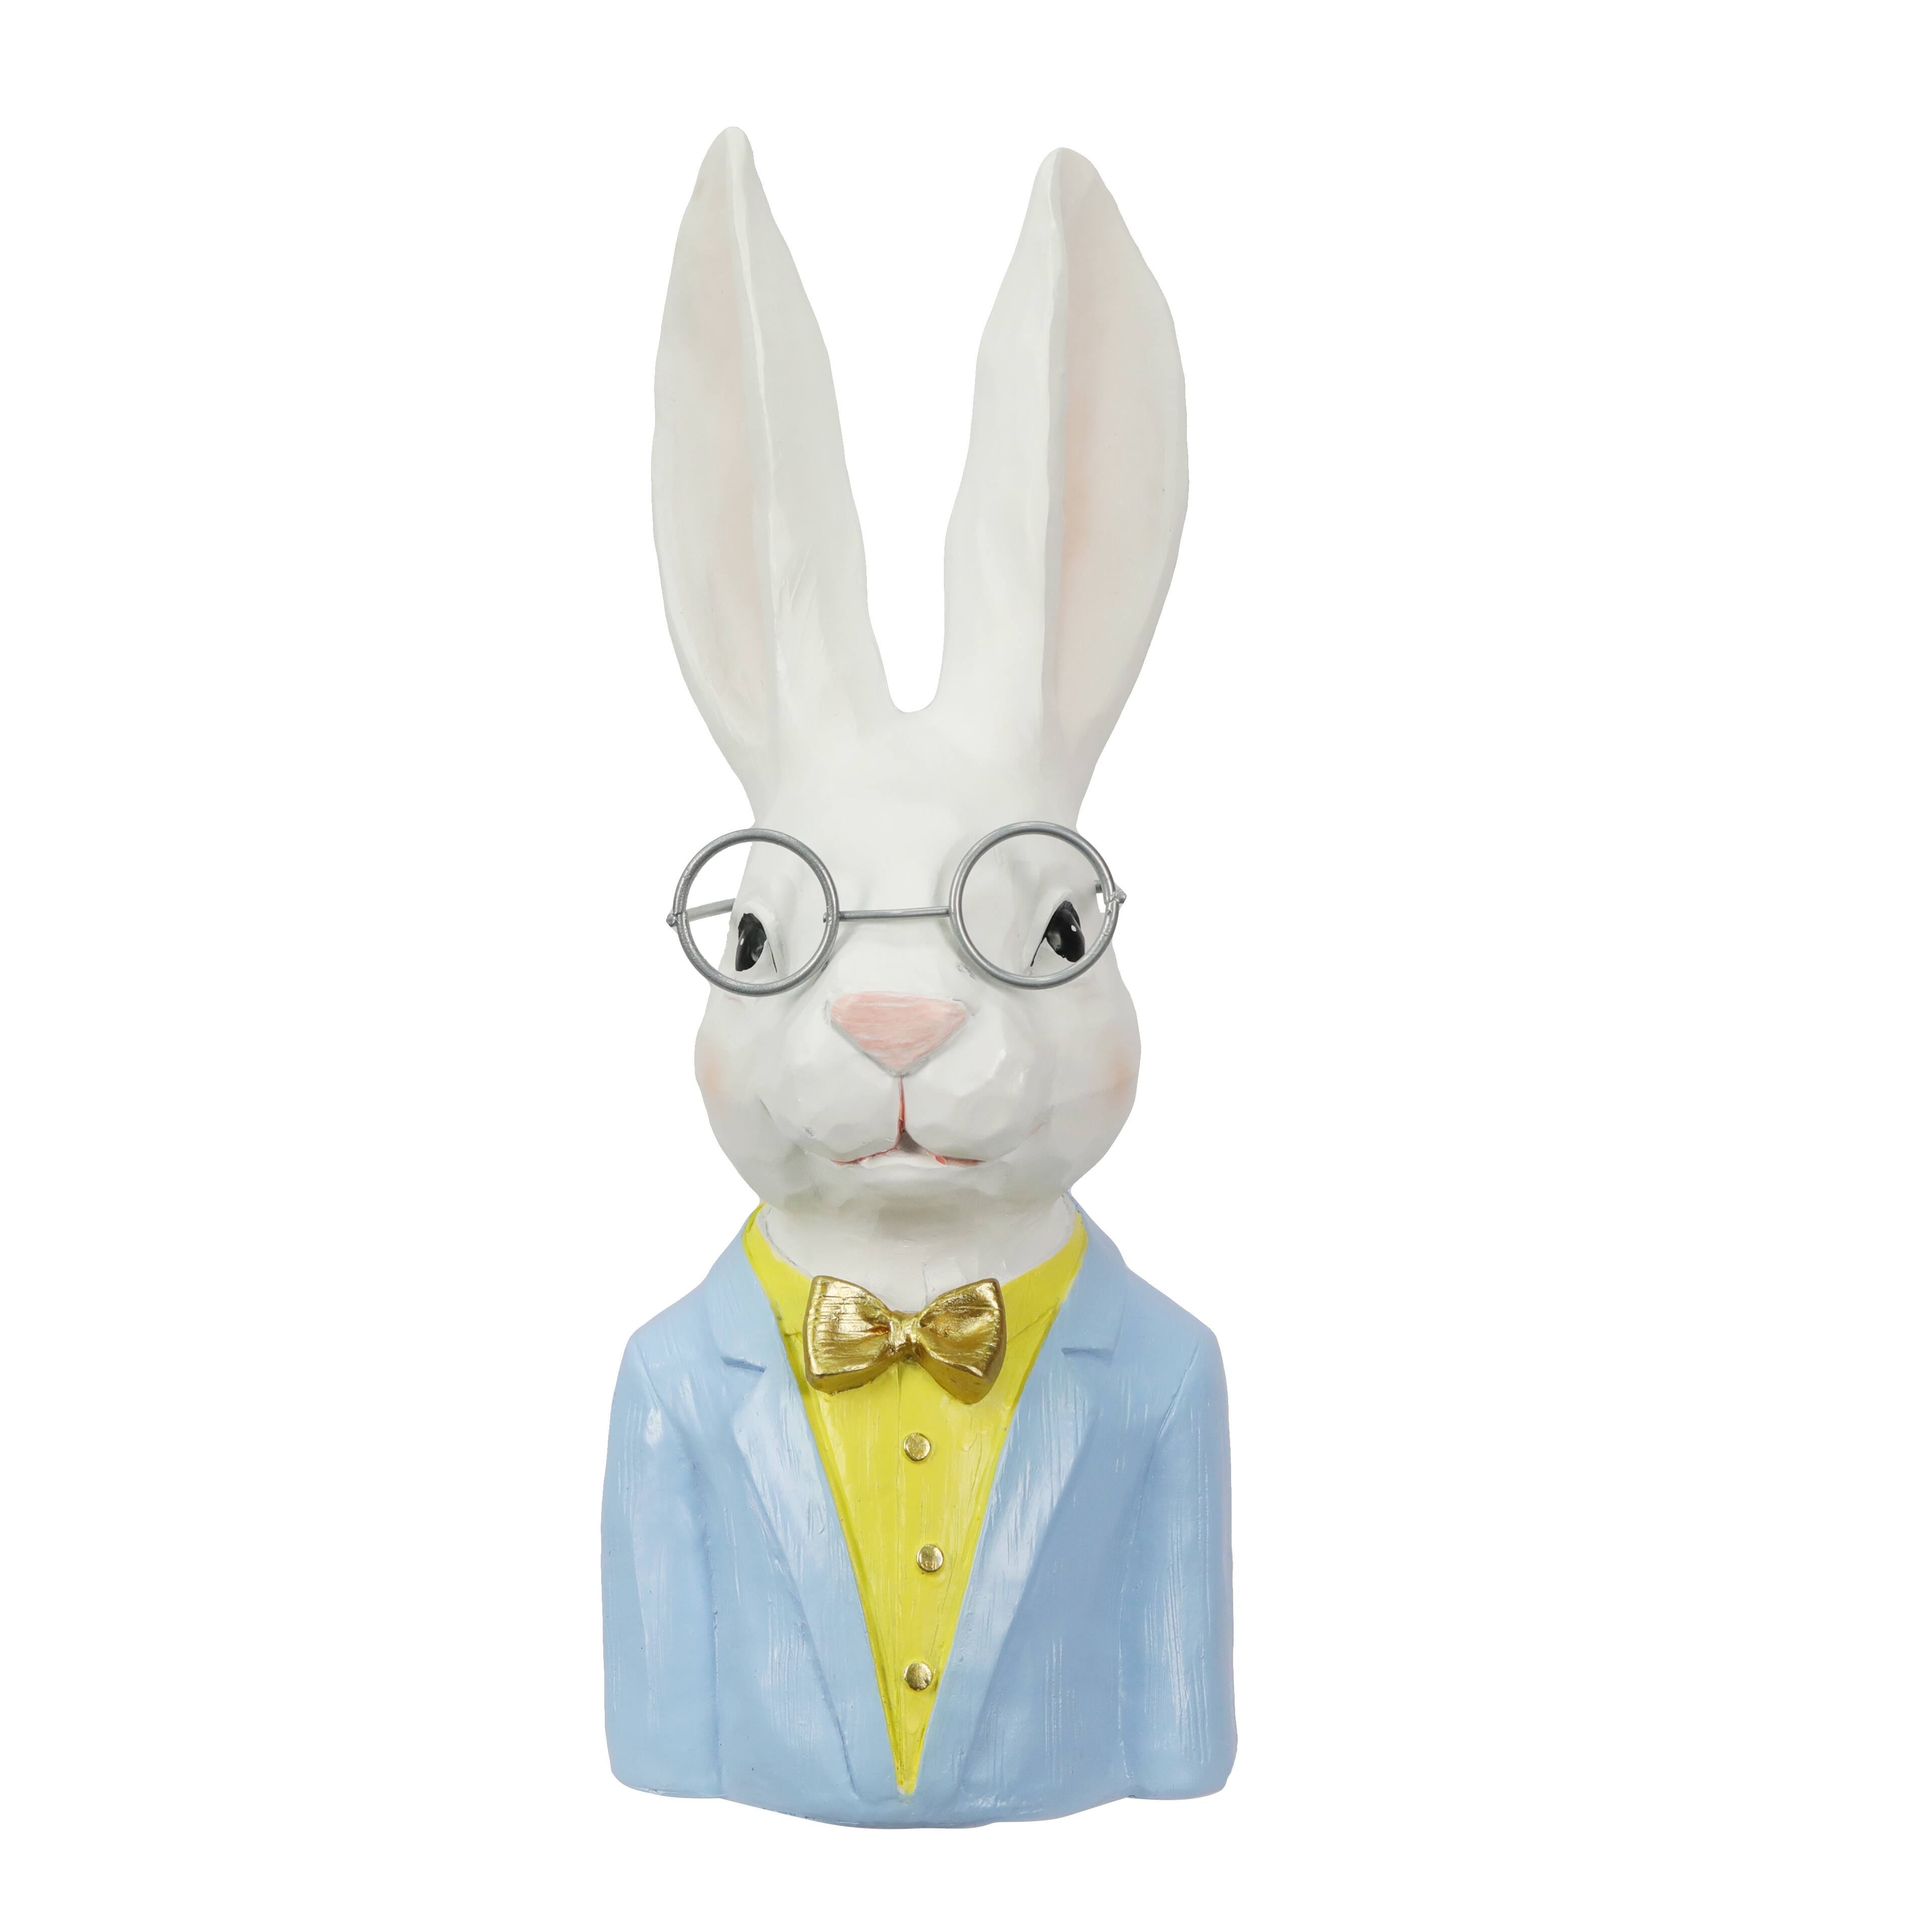 Assorted 13 Tabletop Easter Bunny with Glasses by Ashland®, 1pc.